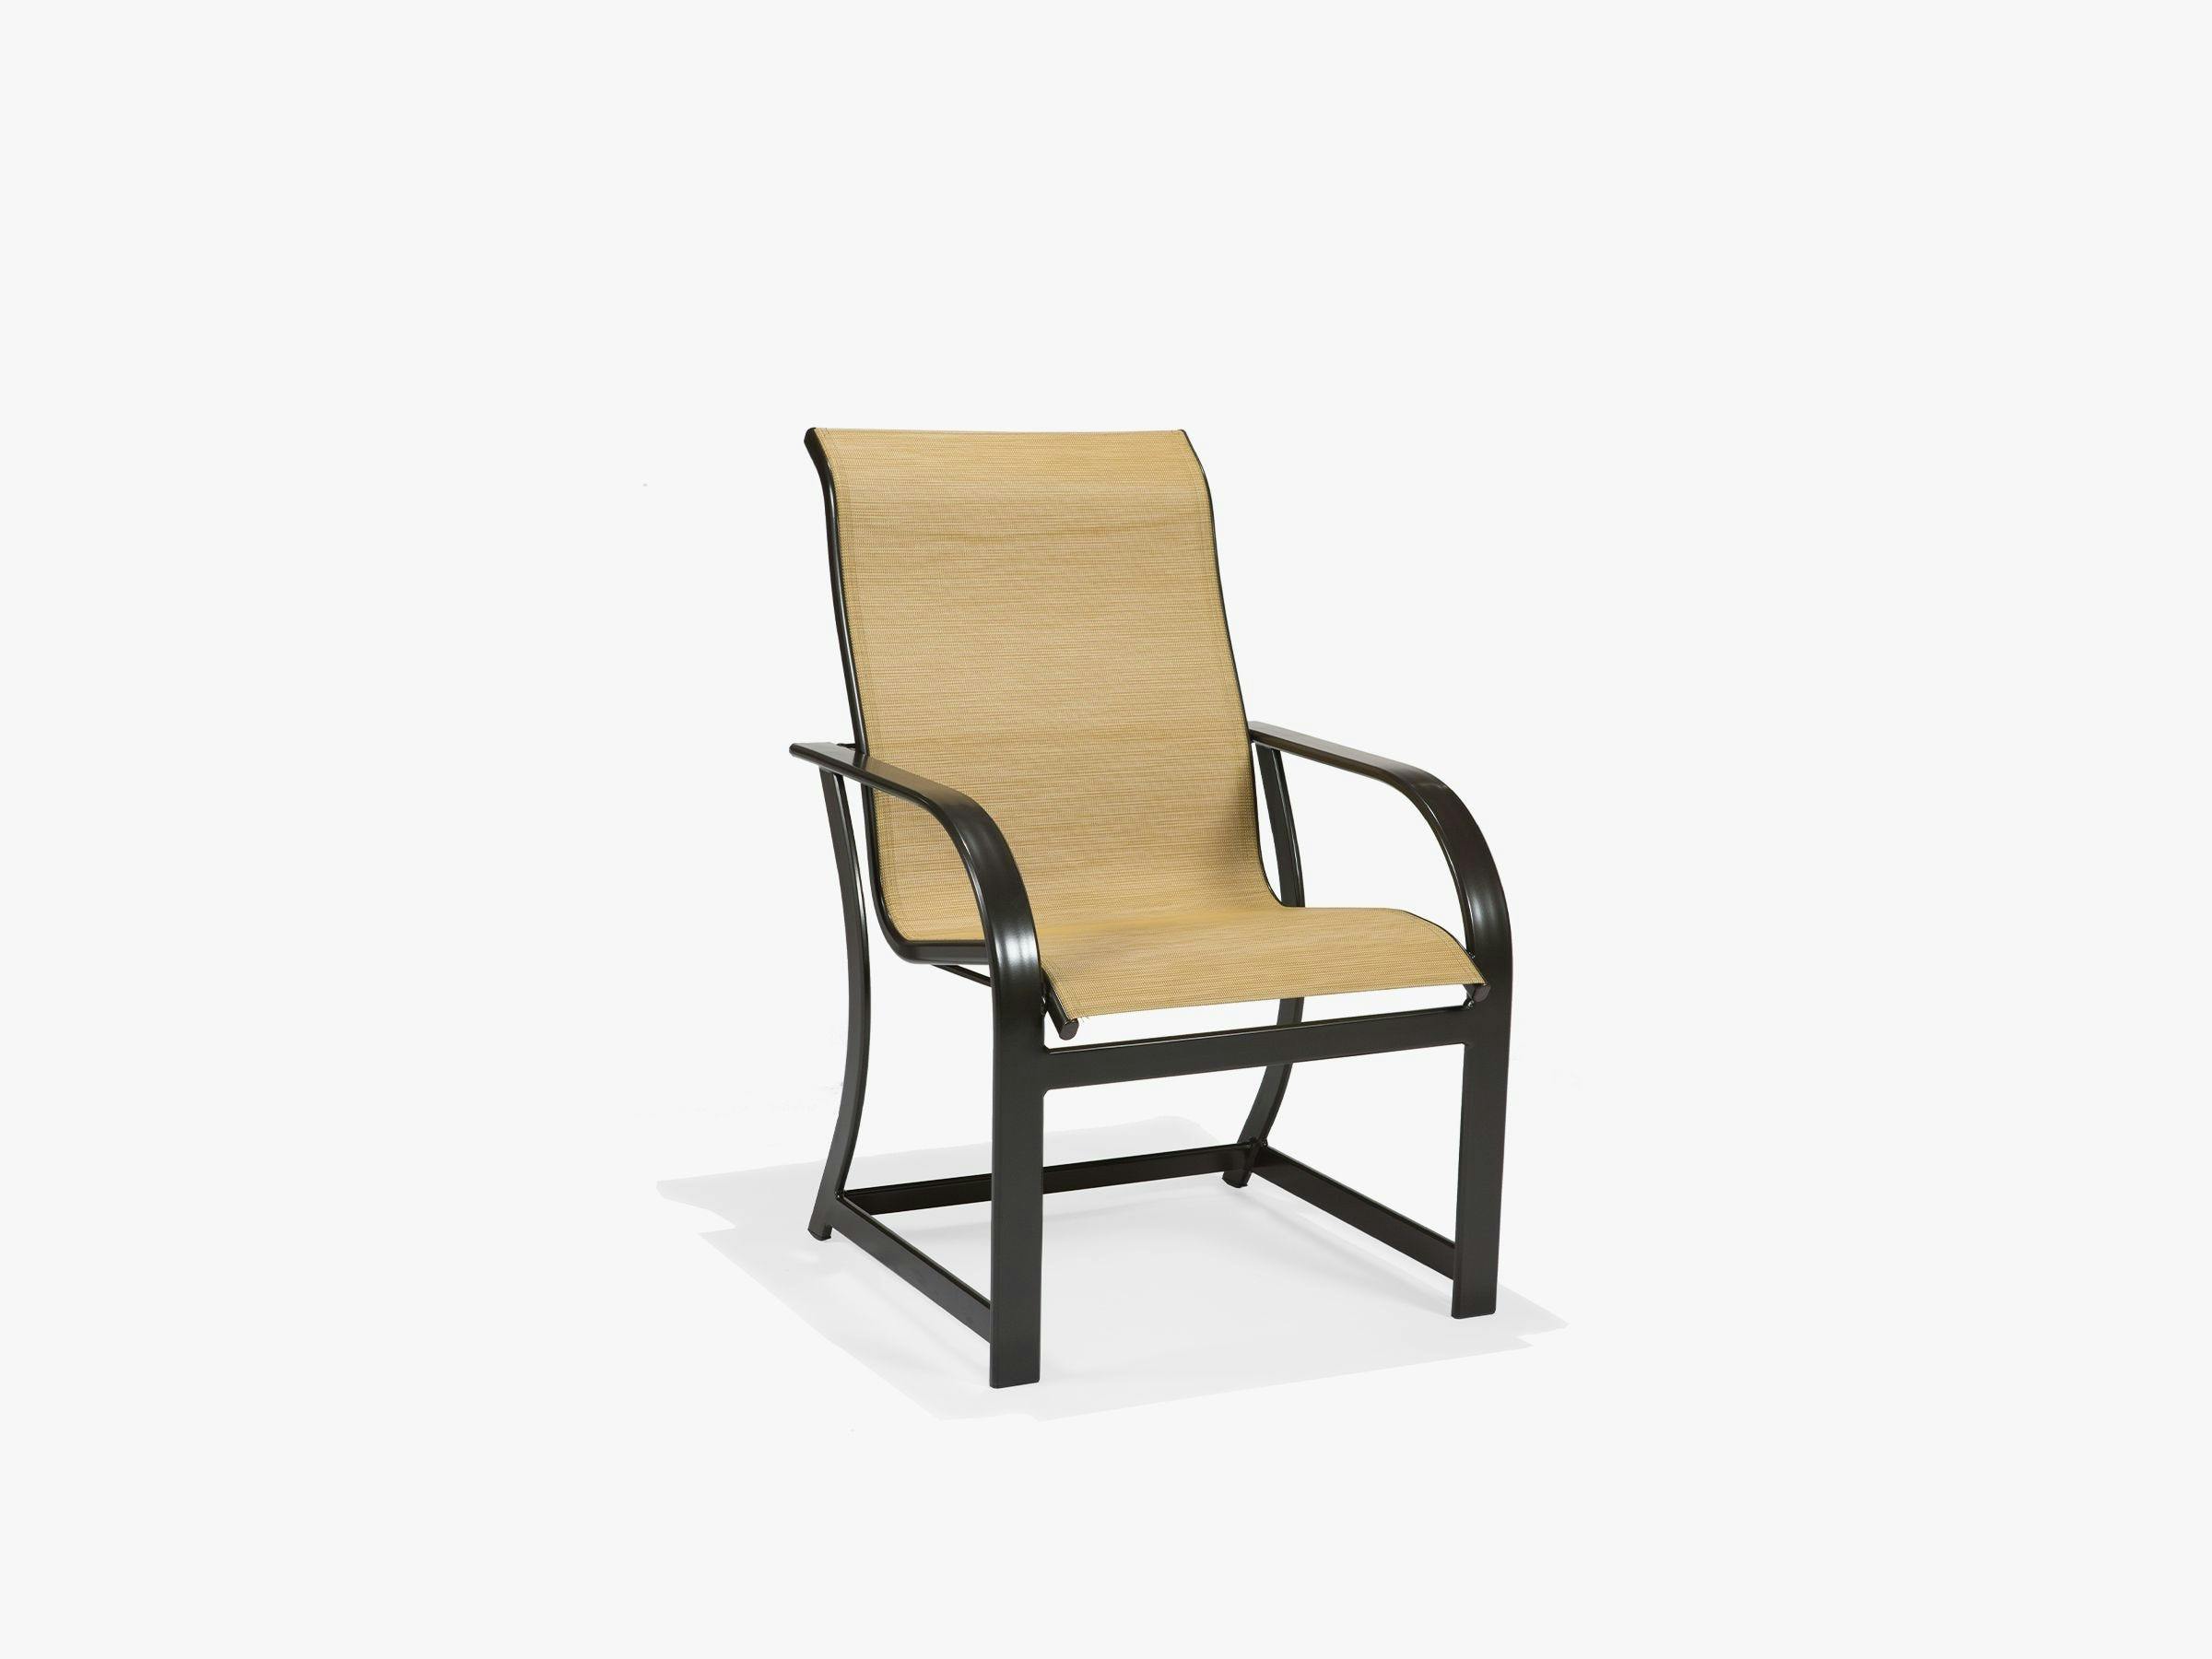 Key West Sling High Back Dining Chair